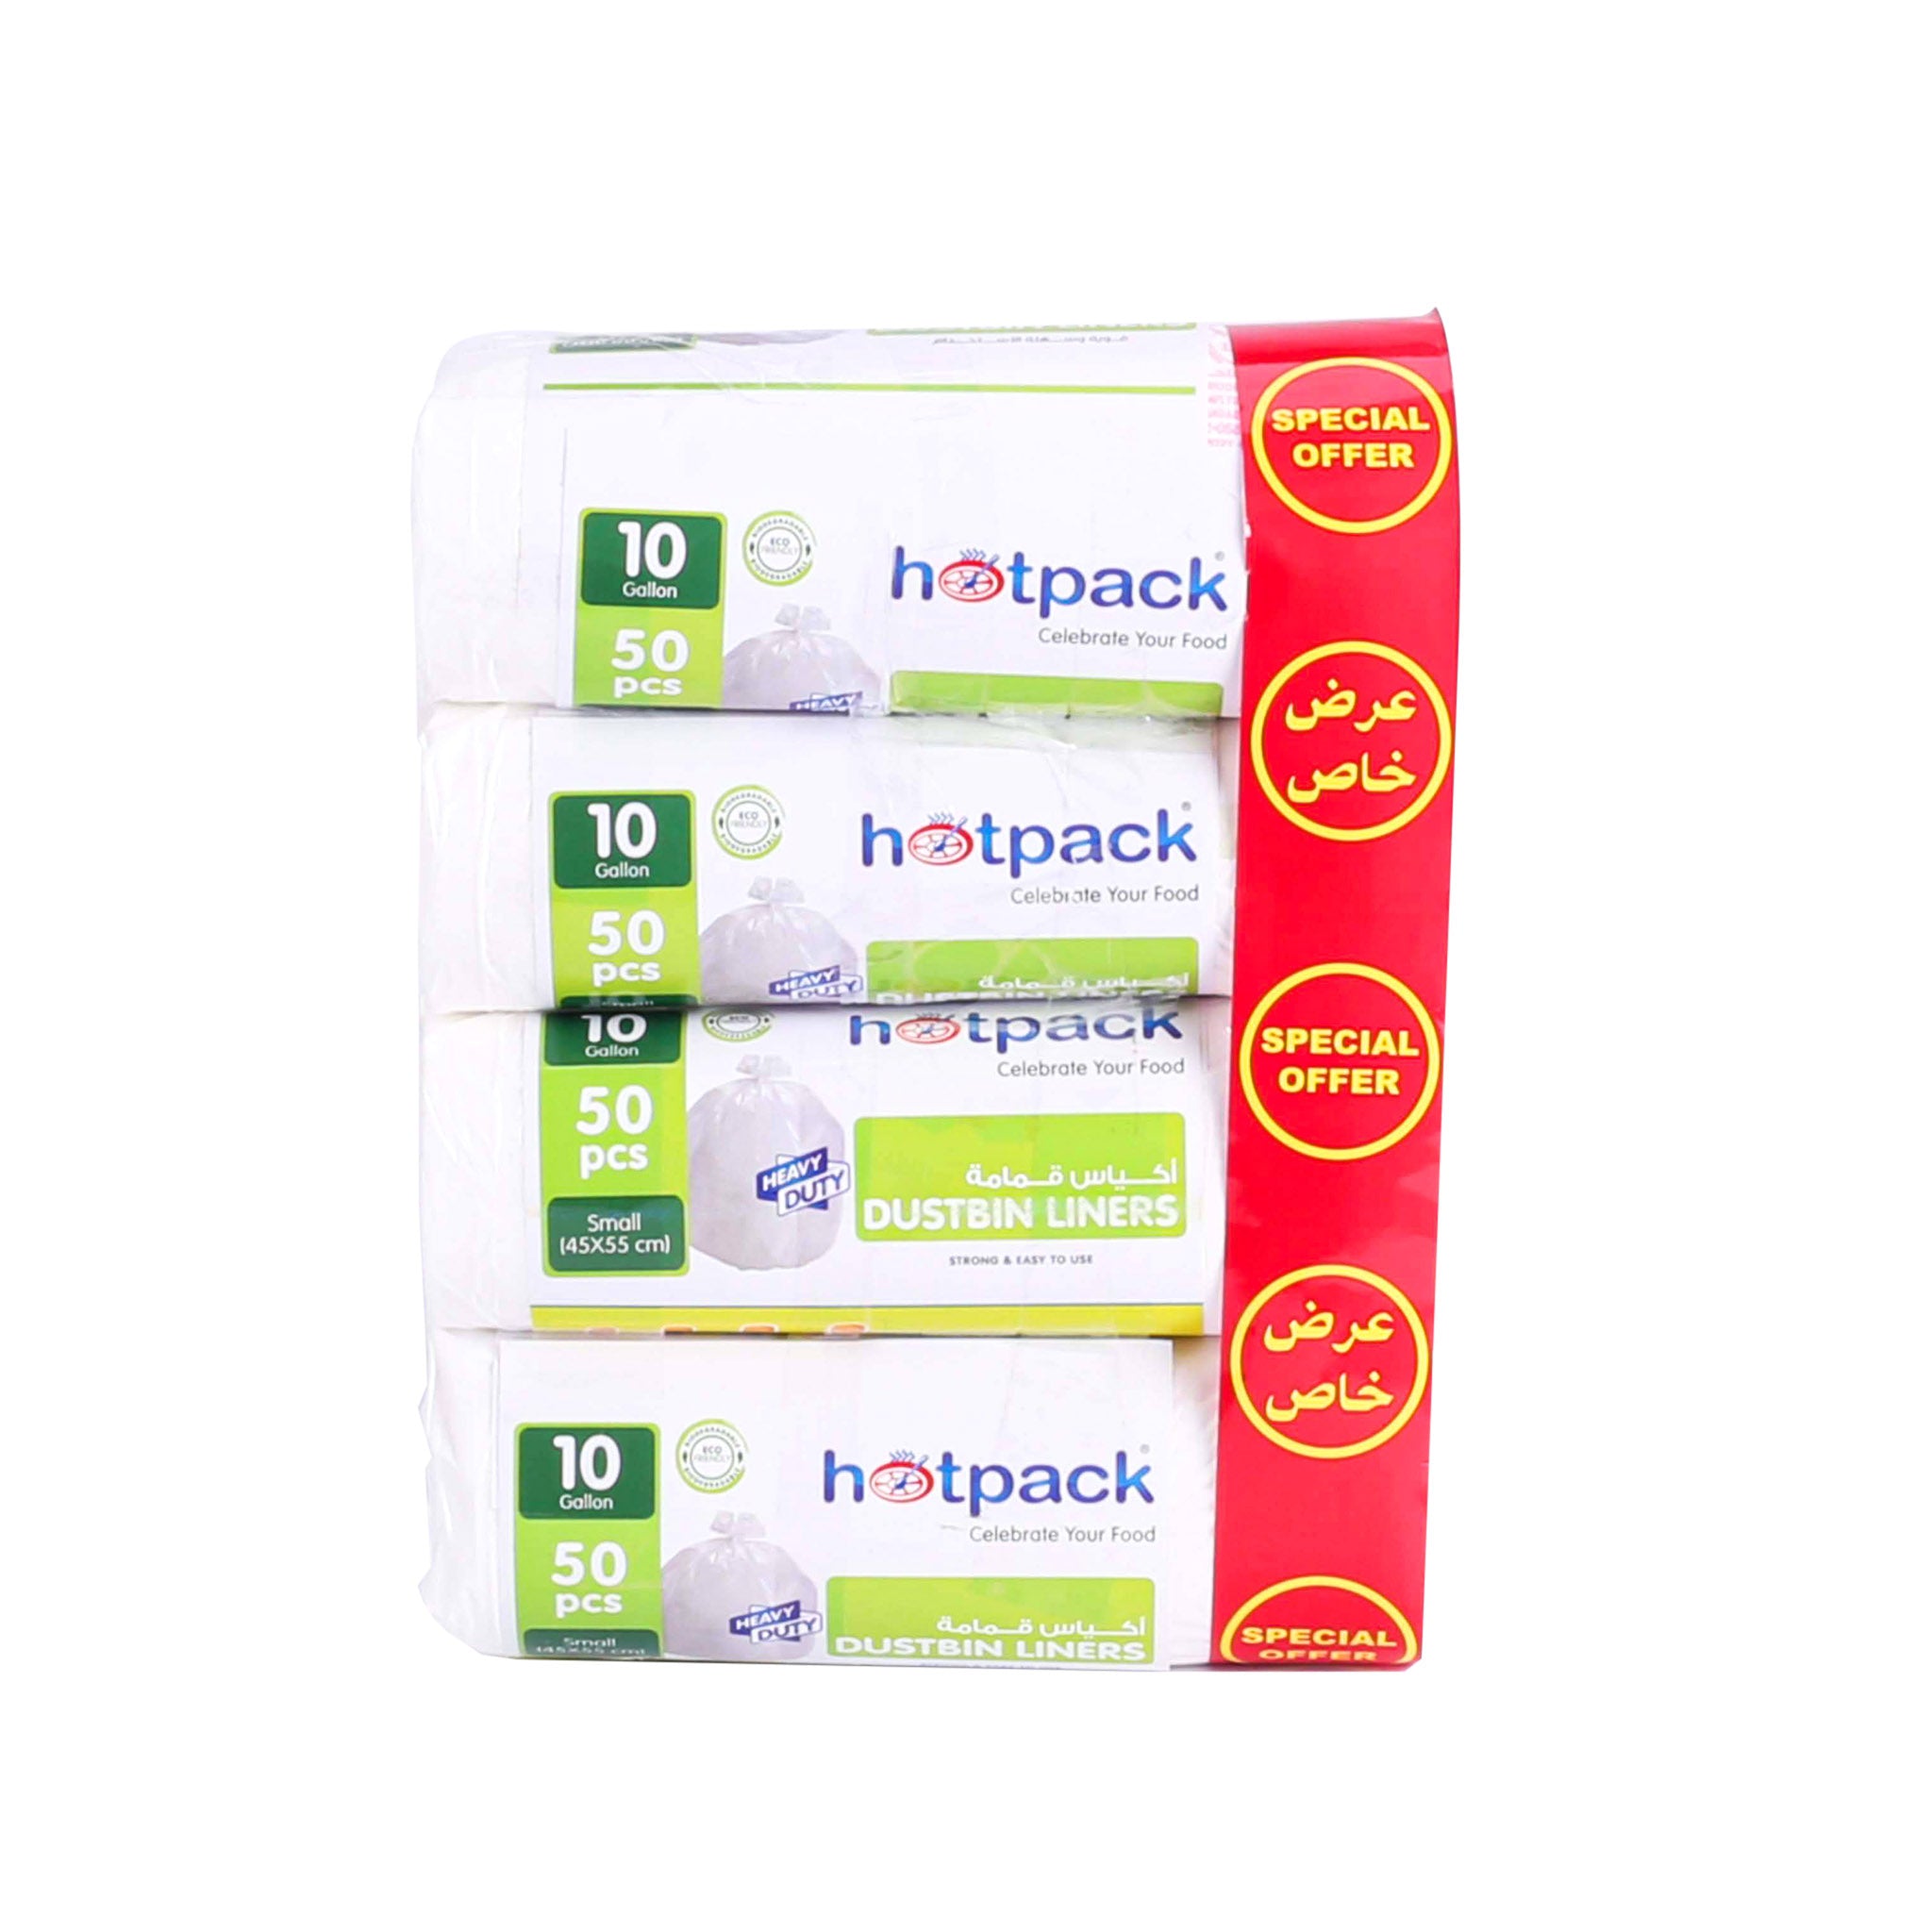 Garbage Bag Roll 65 x 95 cm Offer Pack + Garbage Bag Offer Pack Buy 2 Get 2 50 Pieces x 4 Rolls 27th Anniversary Combo - Hotpack UAE